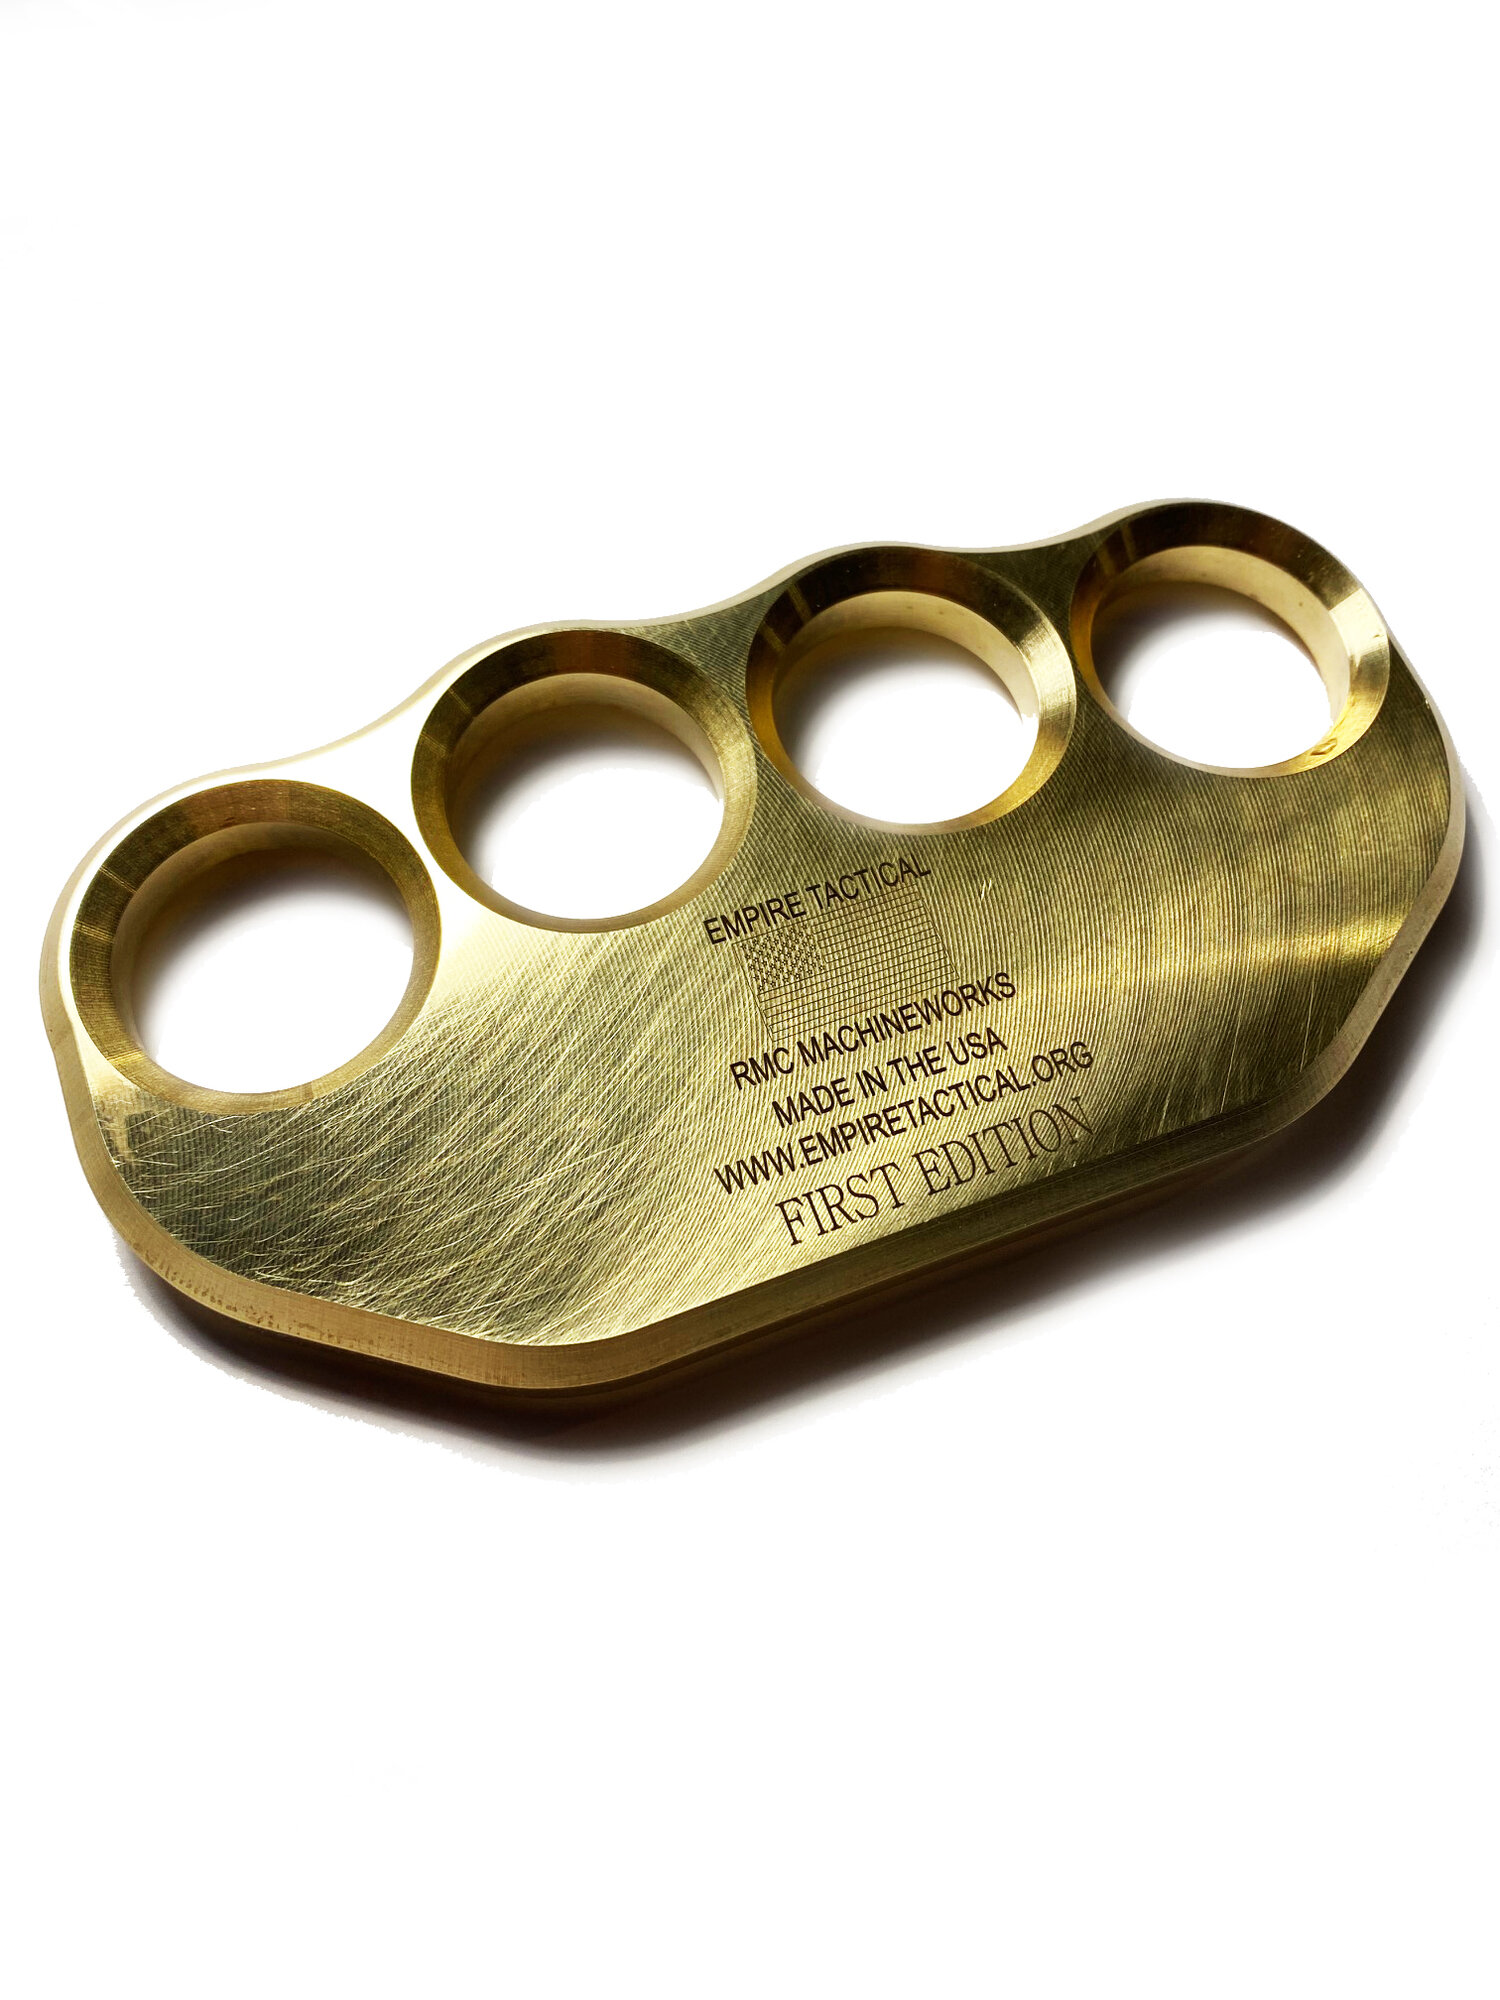 The First Edition - Solid Brass (Limited run) knuckles (American made) —  Empire Tactical USA